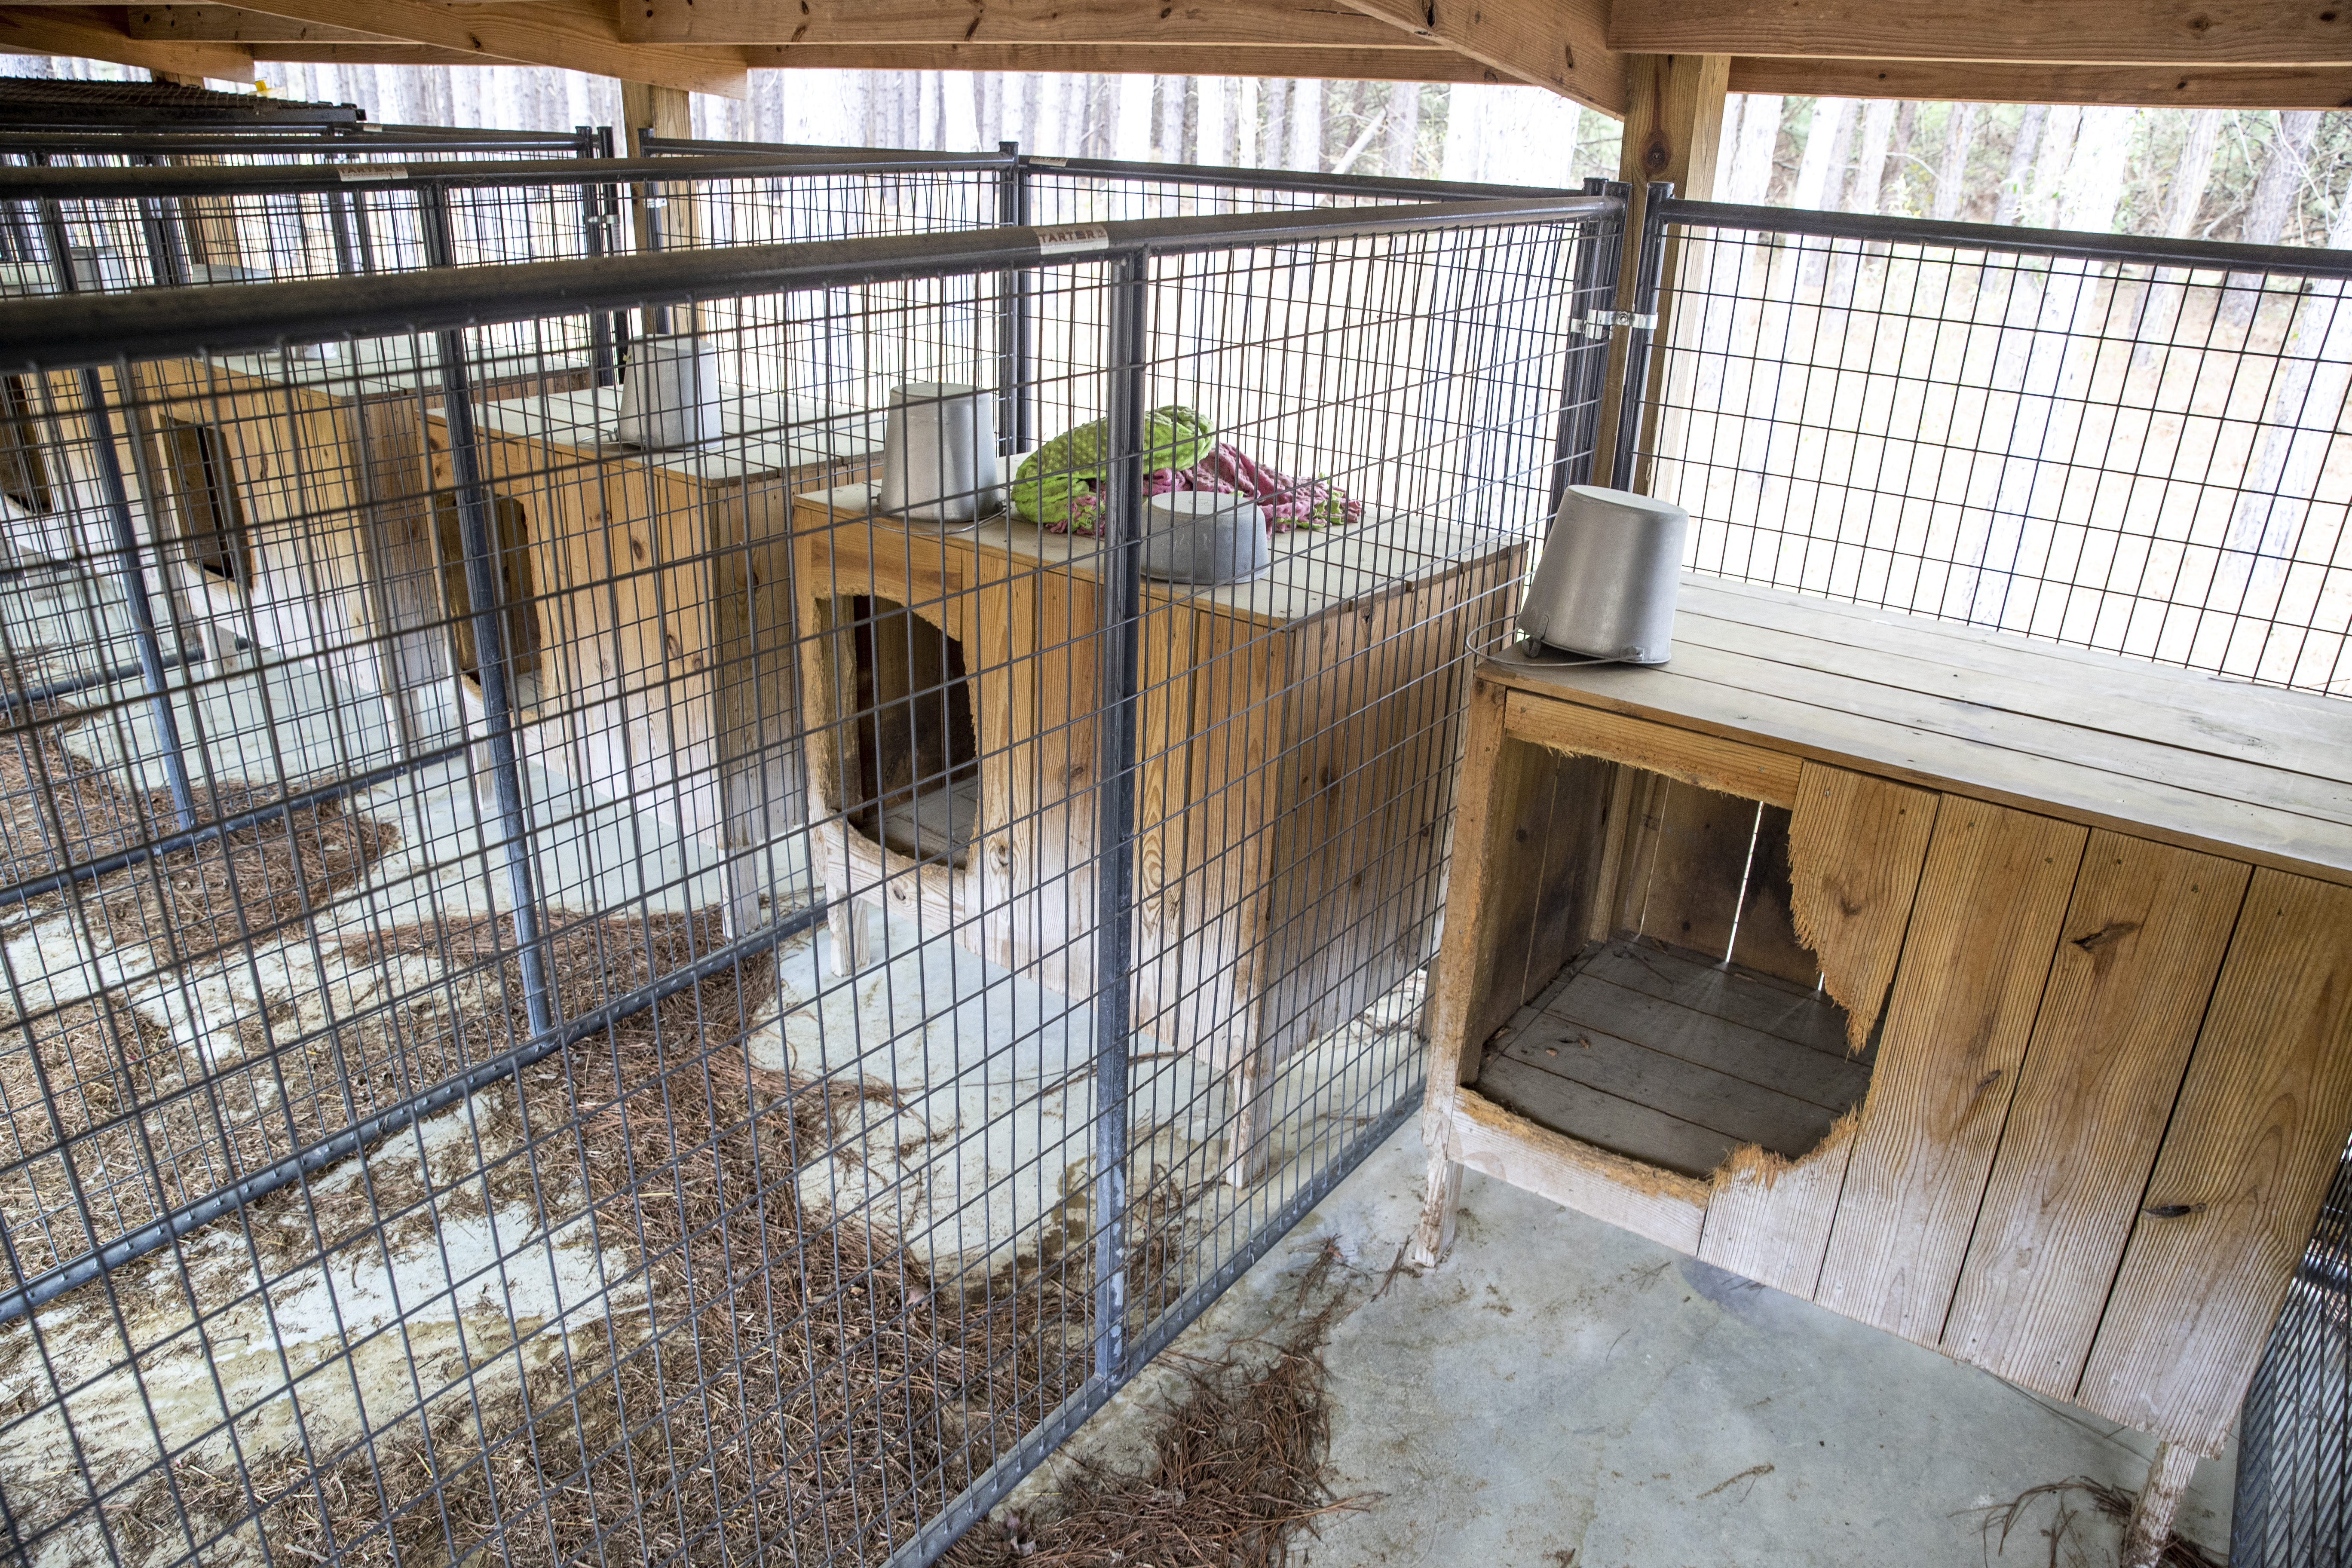 Dog kennels at the Murdaugh Moselle property on Wednesday, March 1, 2023 in Islandton, S.C.